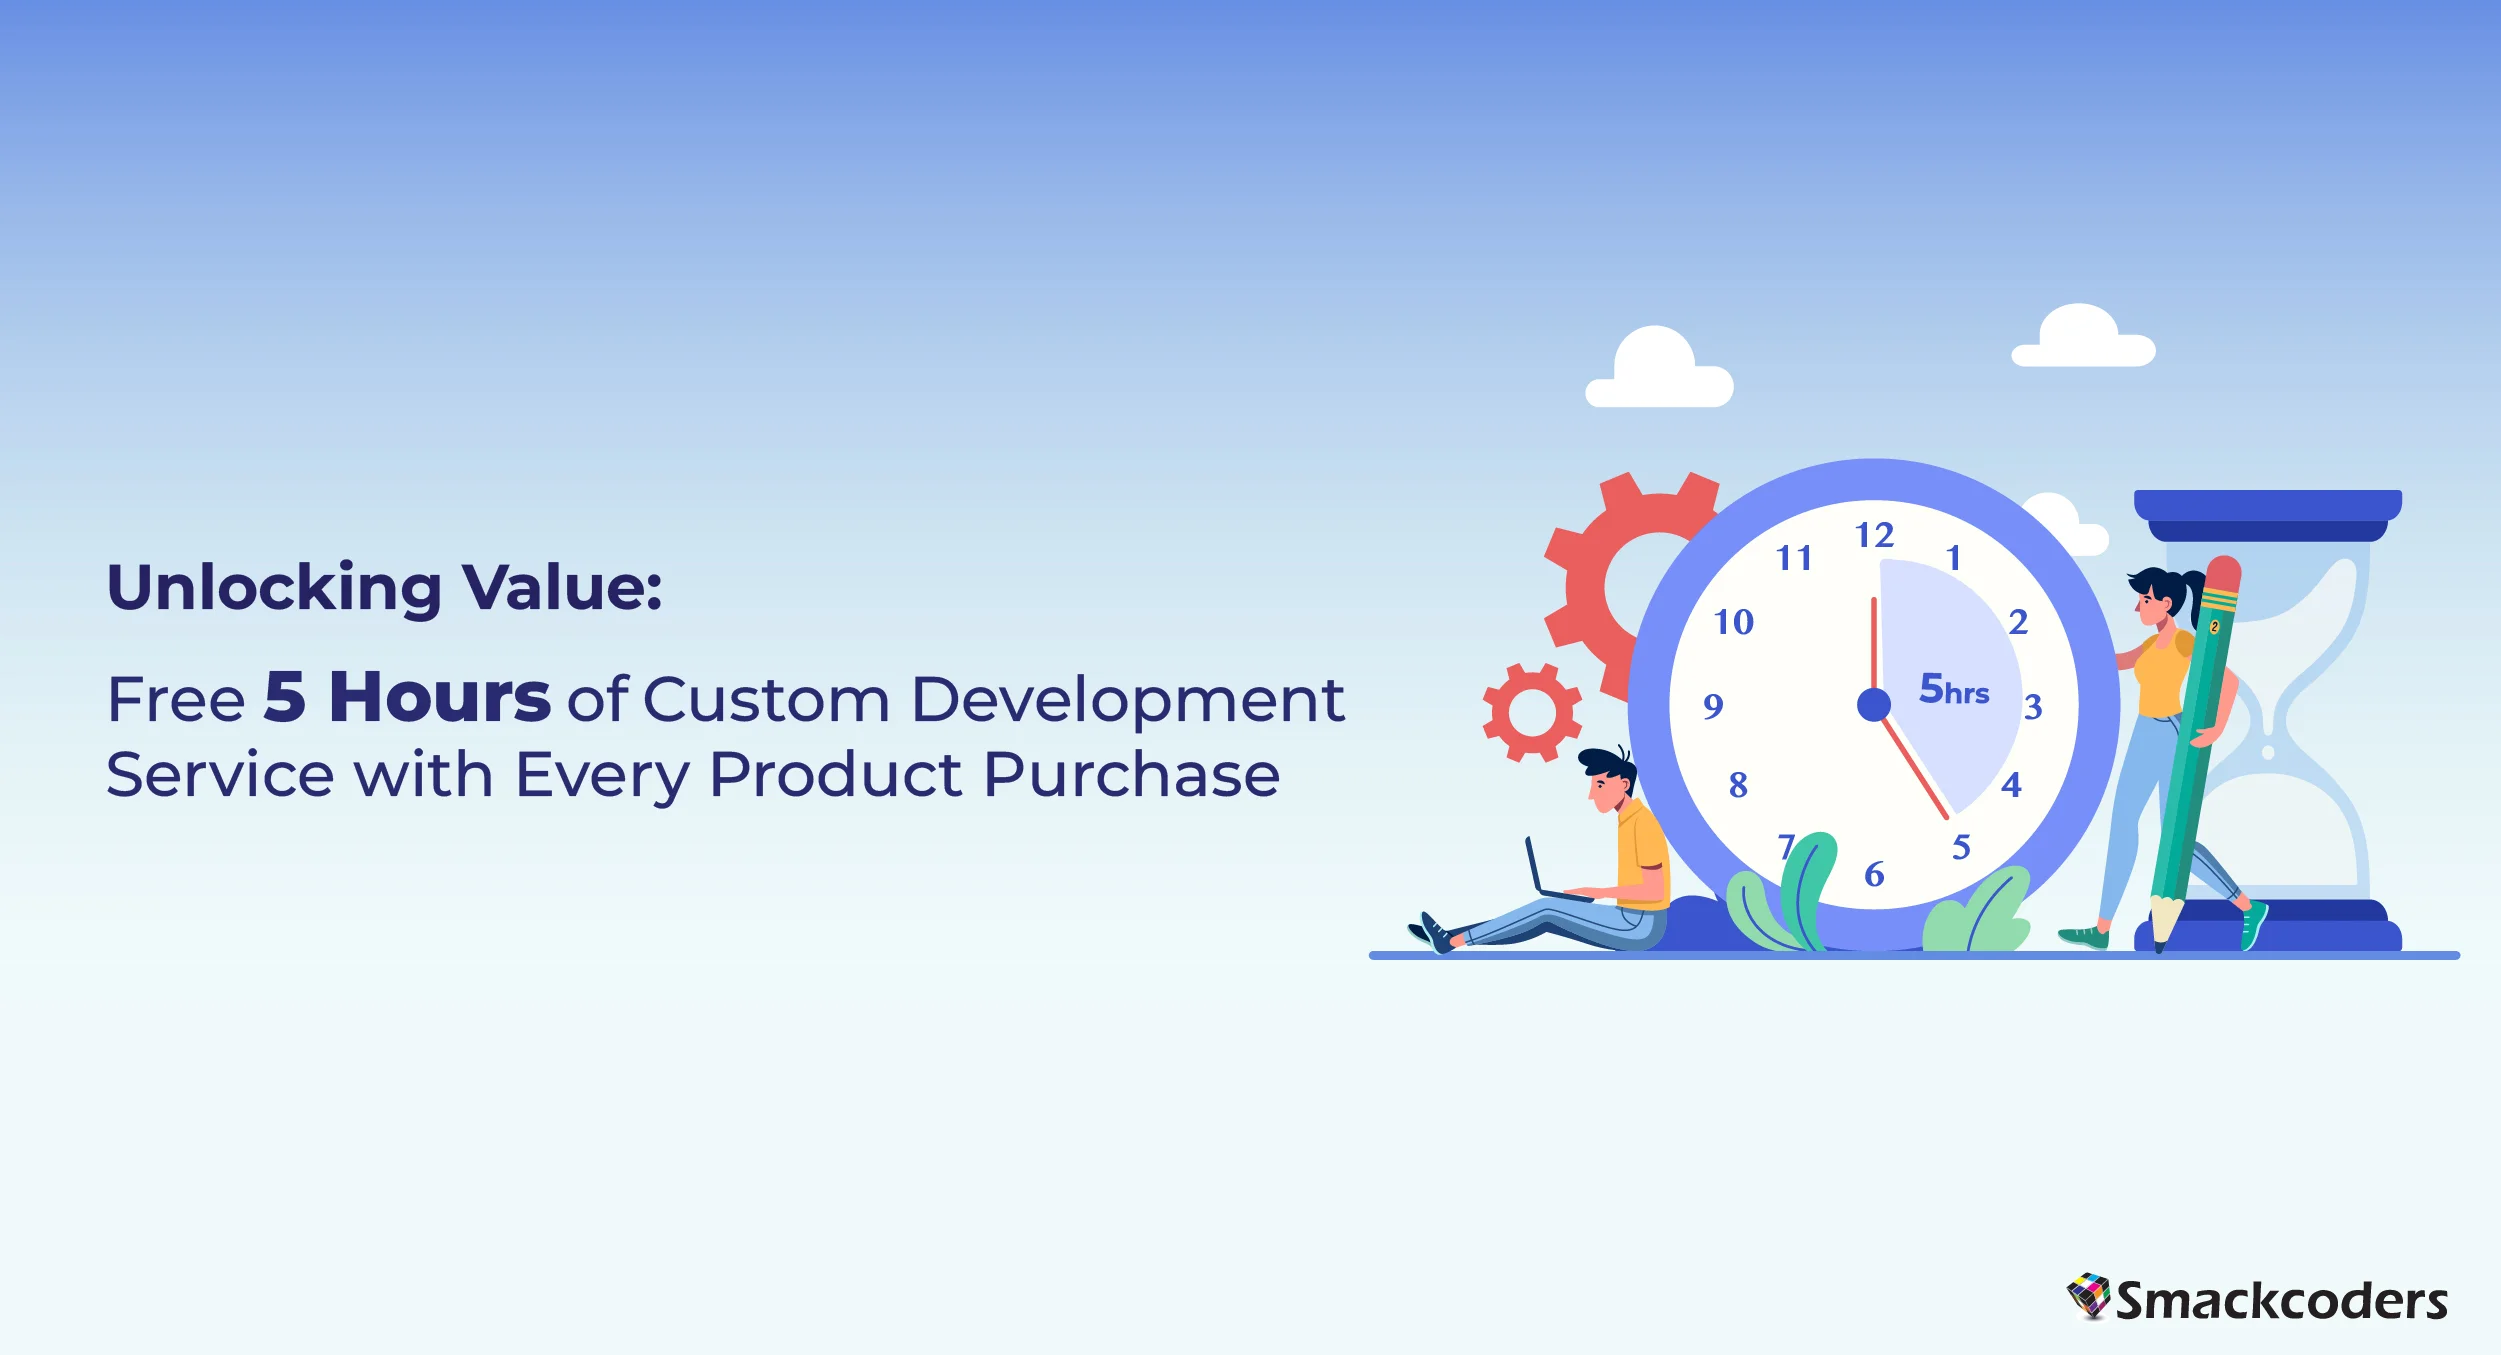 Free 5 hours custom development service with every purchase